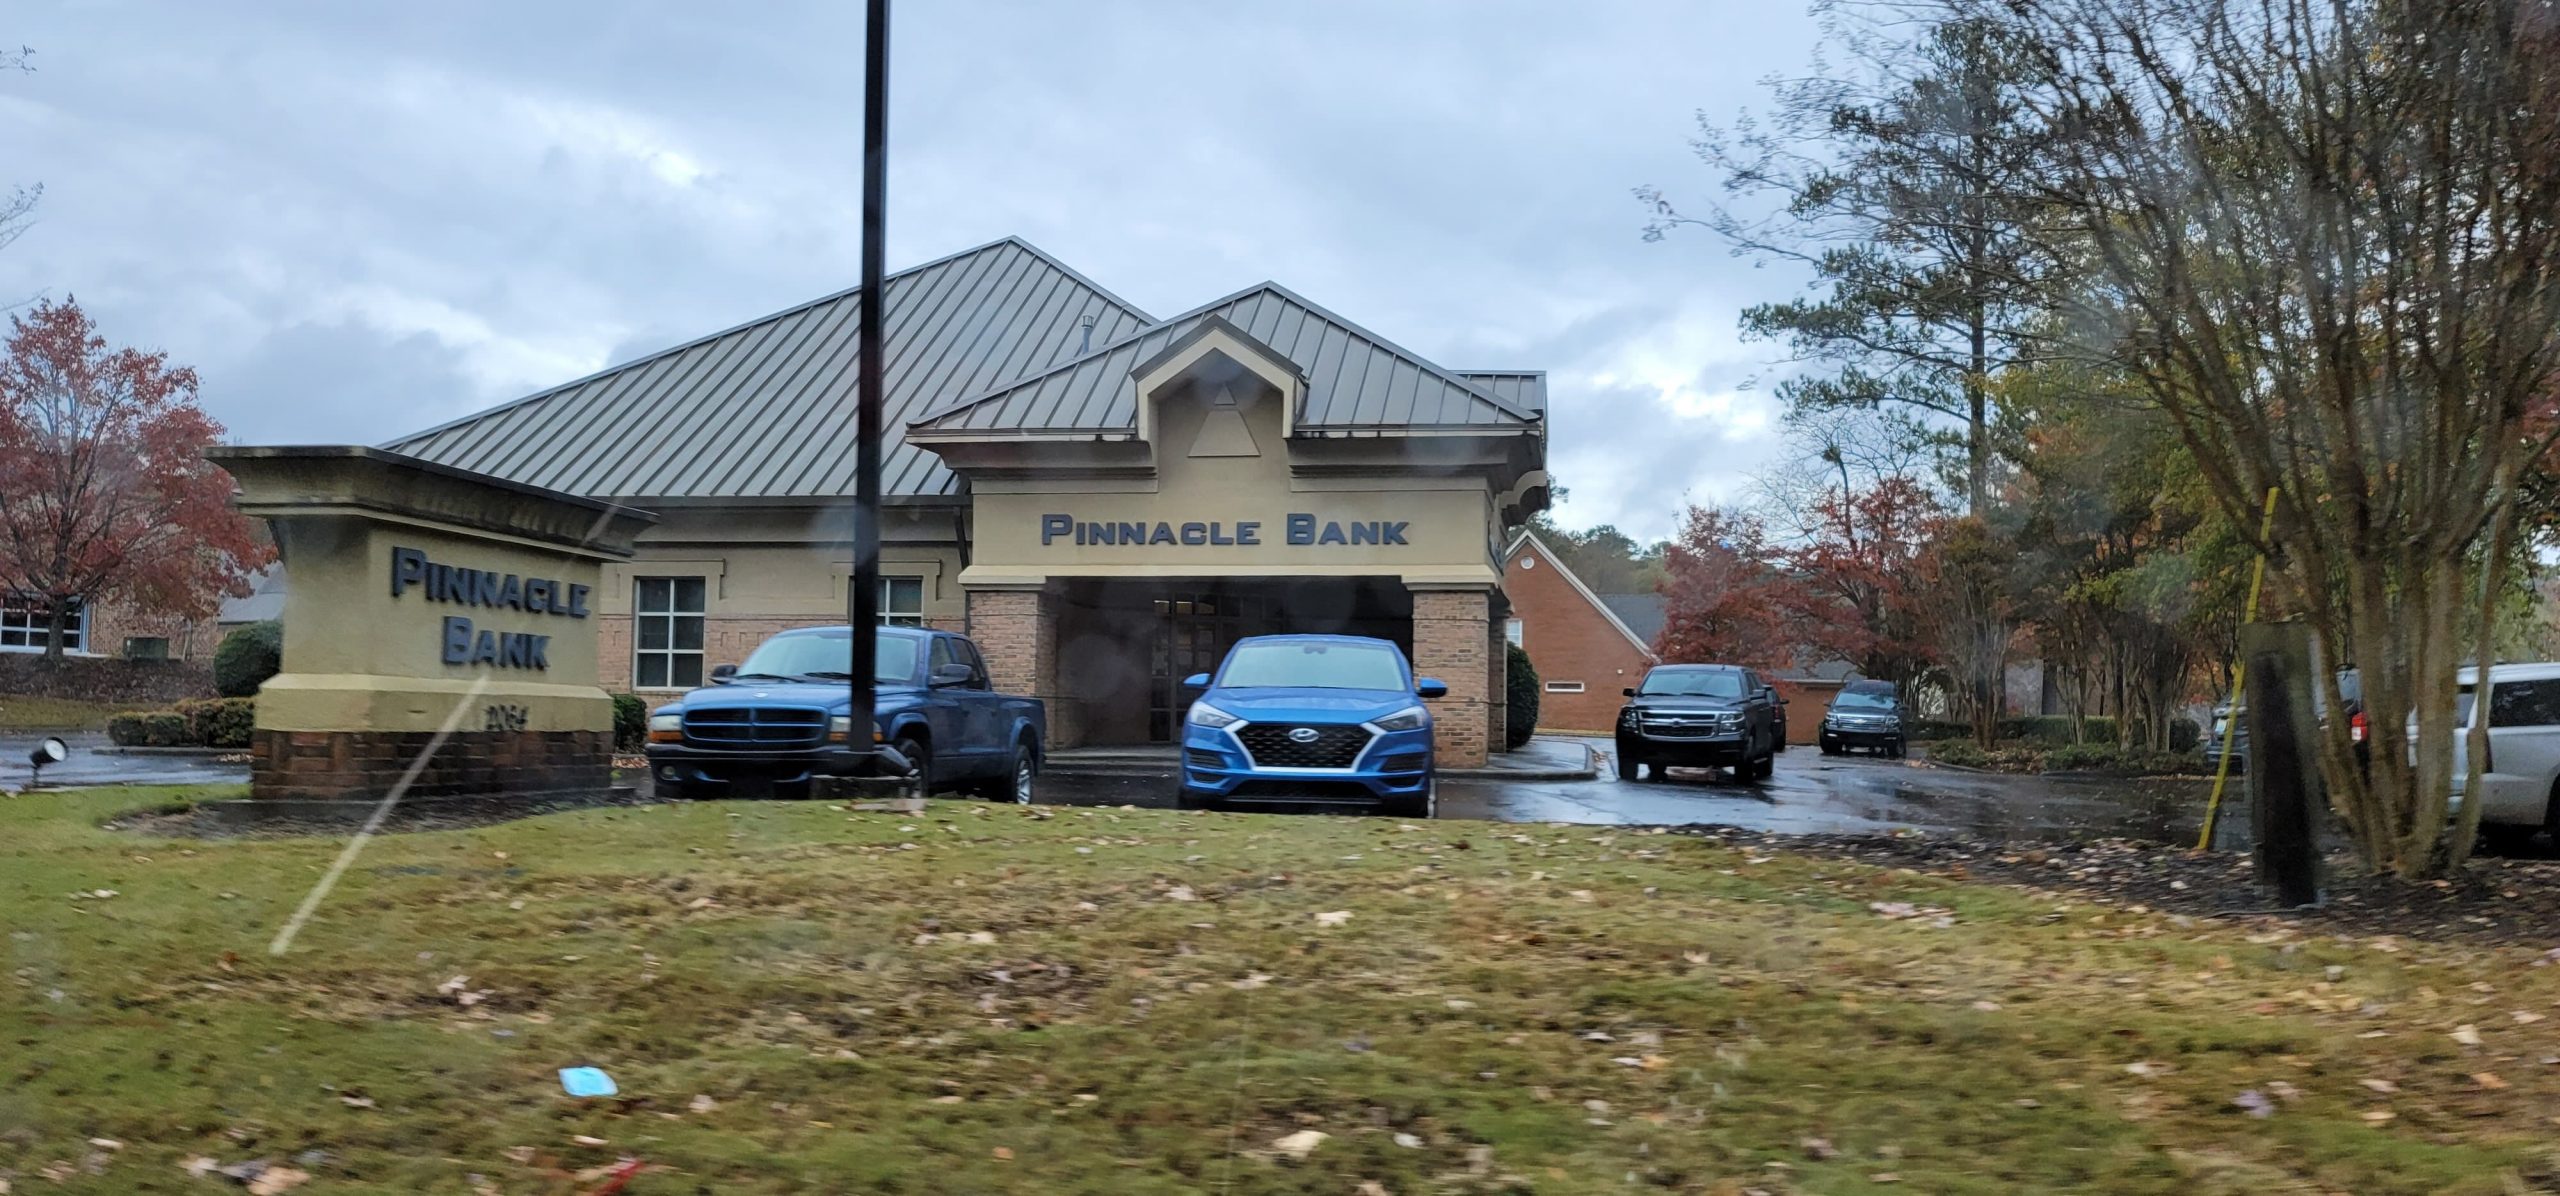 BREAKING: Search underway for attempted bank robbery suspect in Trussville